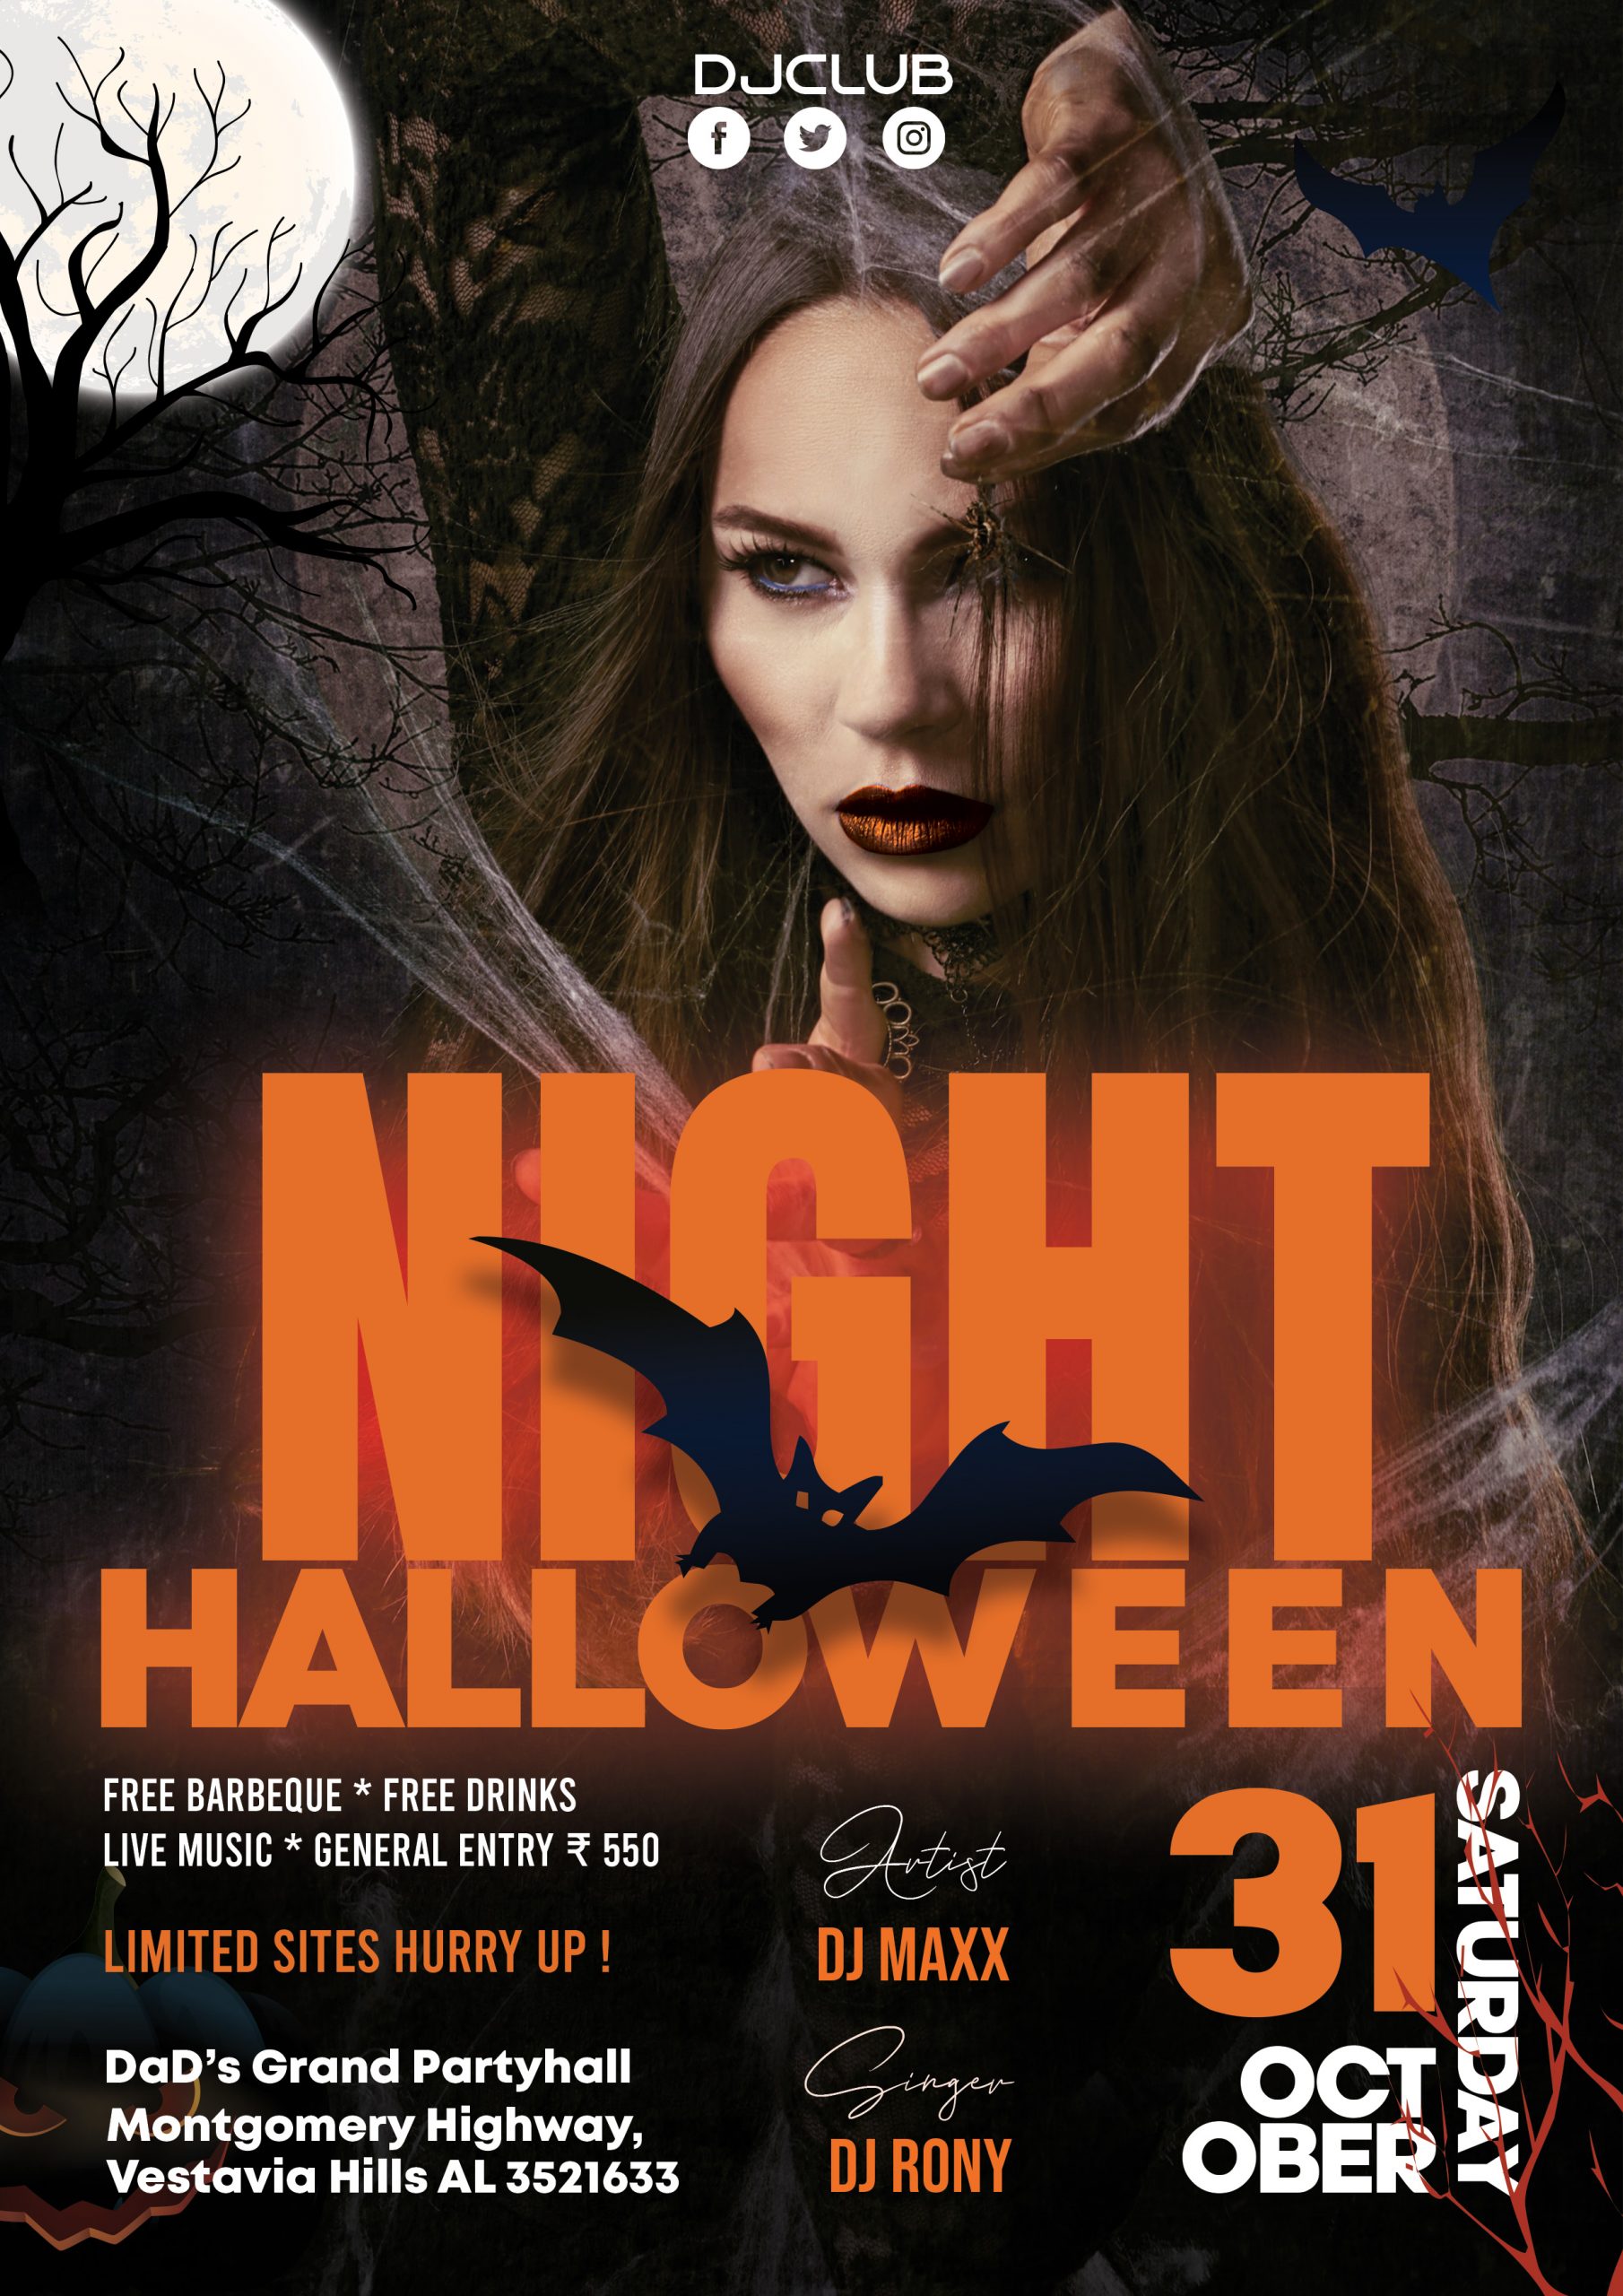 halloween flyer ,partyhard, partying, partynight, partylife, partybus,partyplanner, party flyer app party flyer background design, party flyer maker app,free party flyer maker app ,party flyer ideas ,free party flyer templates psd ,free party flyer templates for microsoft word,party plural ,party's or parties ,party synonym ,party thesaurus ,party meaning in hindi, dad party ,partys, flyers templates ,flyers design,free flyer design templates ,flyer size,summer flyer church ,summer flyer ideas ,poster , flyer vector , flyer ,summer day poster ideas,postermywall com flyer ,happy fathers day ,poster my wall trackid,halloween flyer day 2020 uk,party ,partying ,fun ,instaparty #instafun #instagood #bestoftheday #crazy #friend #friends #besties #guys ,girls ,chill ,chilling ,kickit ,kickinit ,cool ,love ,memories ,night ,smile ,music ,outfit ,funtime ,funtimes ,goodtime ,goodtimes ,happy,free printable thank you tags for favors ,free customizable printable favor tags ,free printable thank you for coming to my birthday party tags ,free printable thank you tags for birthdays ,free editable thank you tags ,gift tag template editable free ,free printable food labels for buffet table ,halloween flyer party name ideas ,decoration ideas for halloween day party 